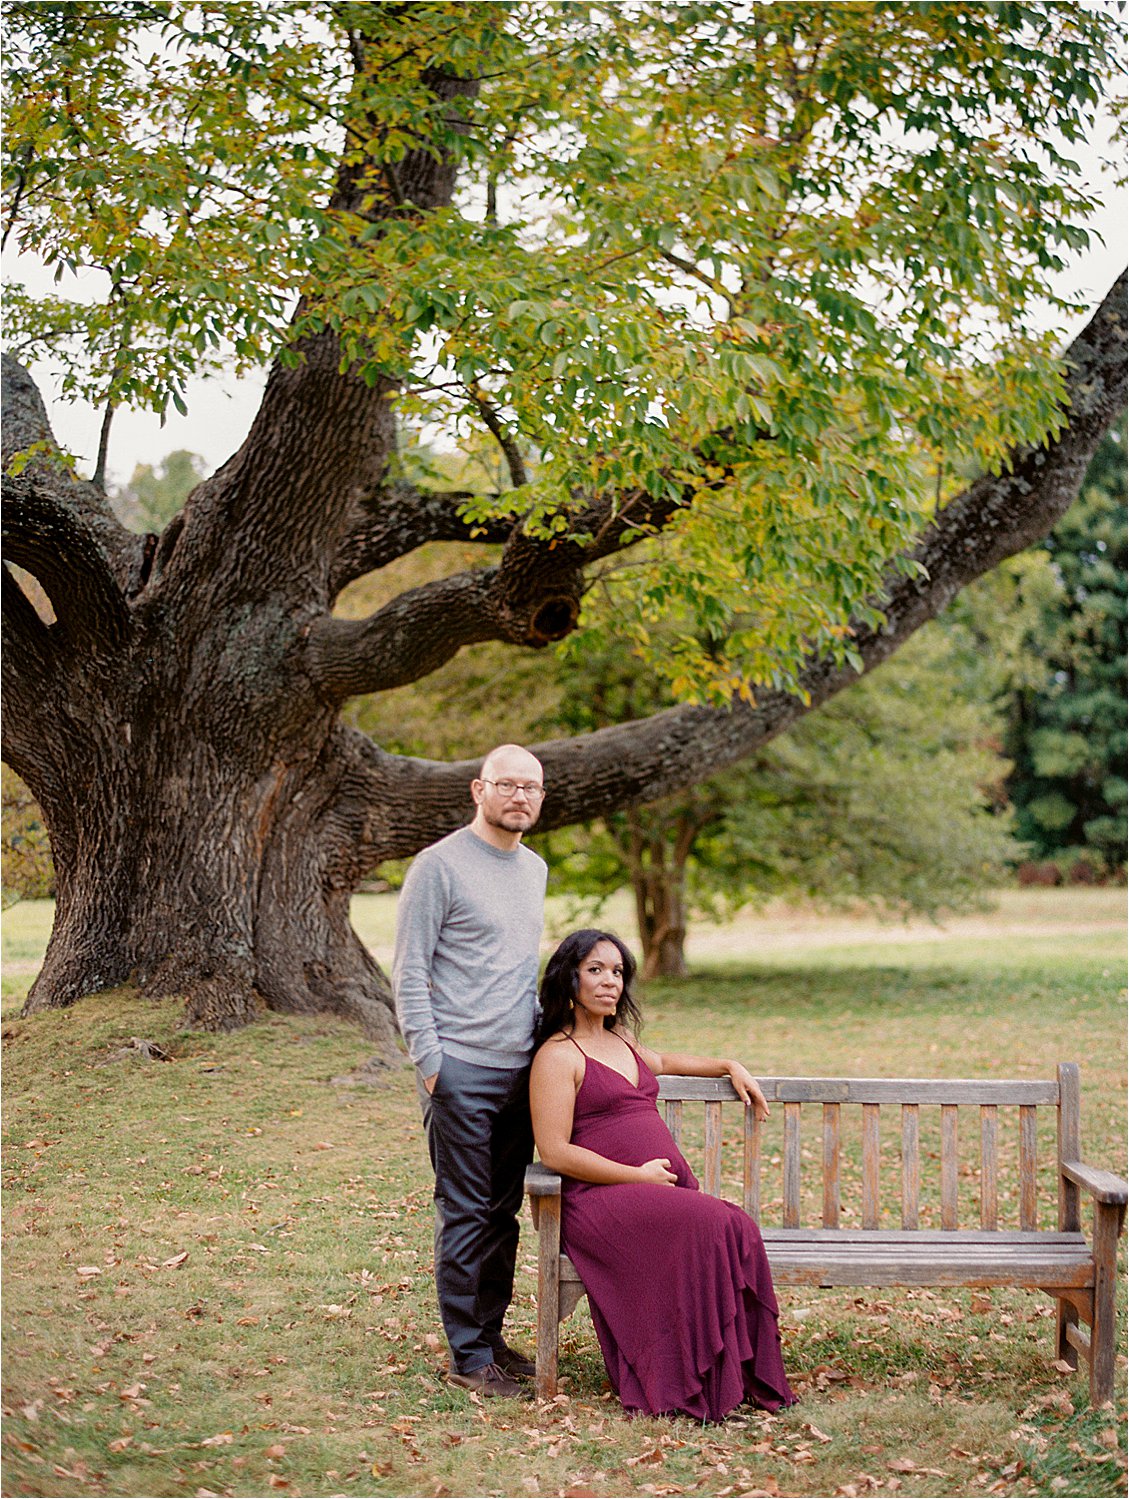 Parents to be at fall outdoor Maternity session at Stevens-Coolidge House with destination film photographer Renee Hollingshead